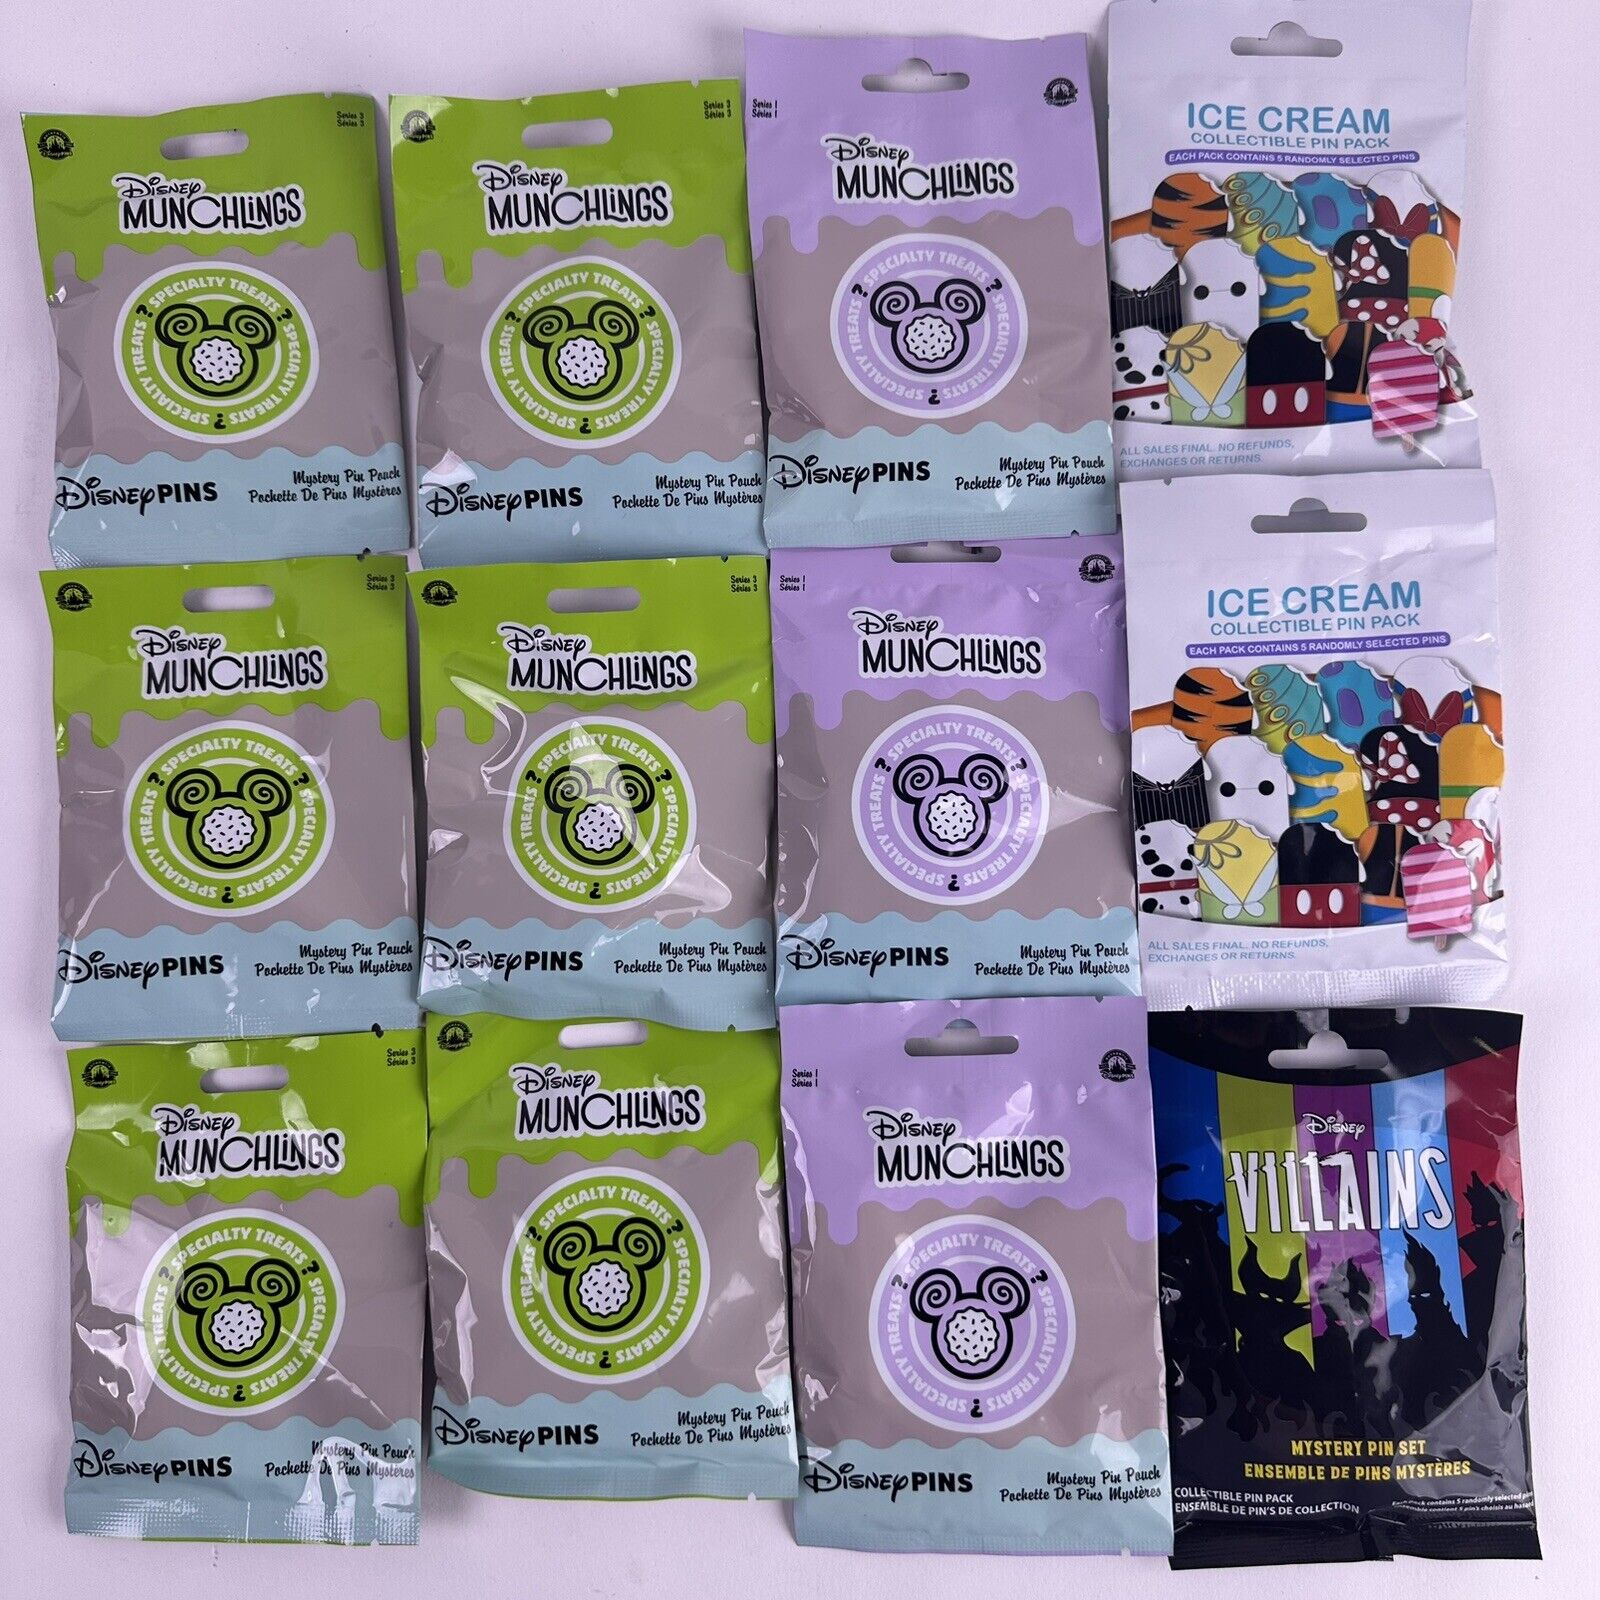 Disney Munchlings Ice Cream Villains Mystery Pin Pack 60 Pins Collection Lot